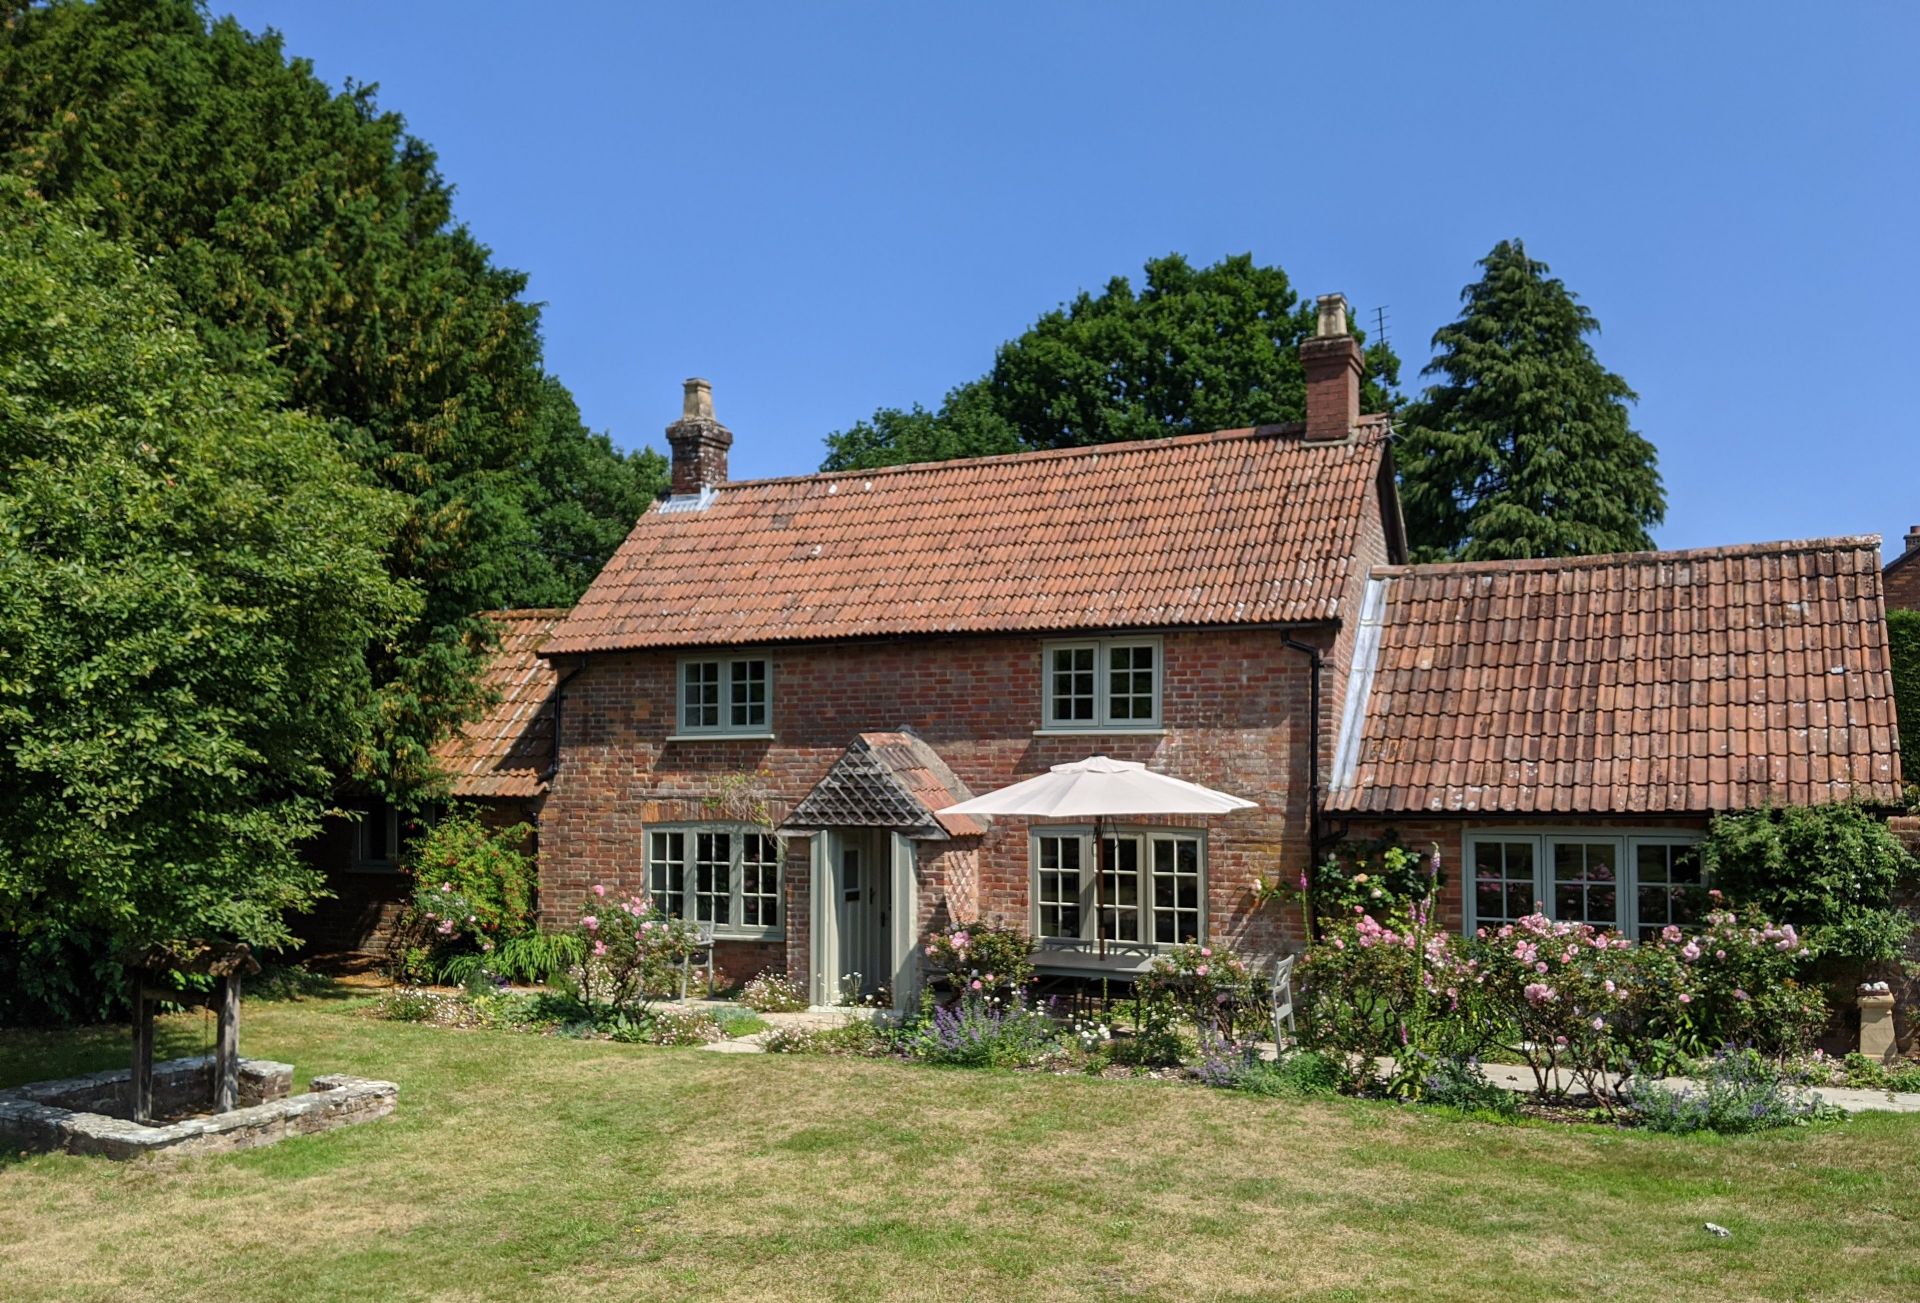 Evergreen a holiday cottage rental for 6 in Hampshire and surrounding villages, 